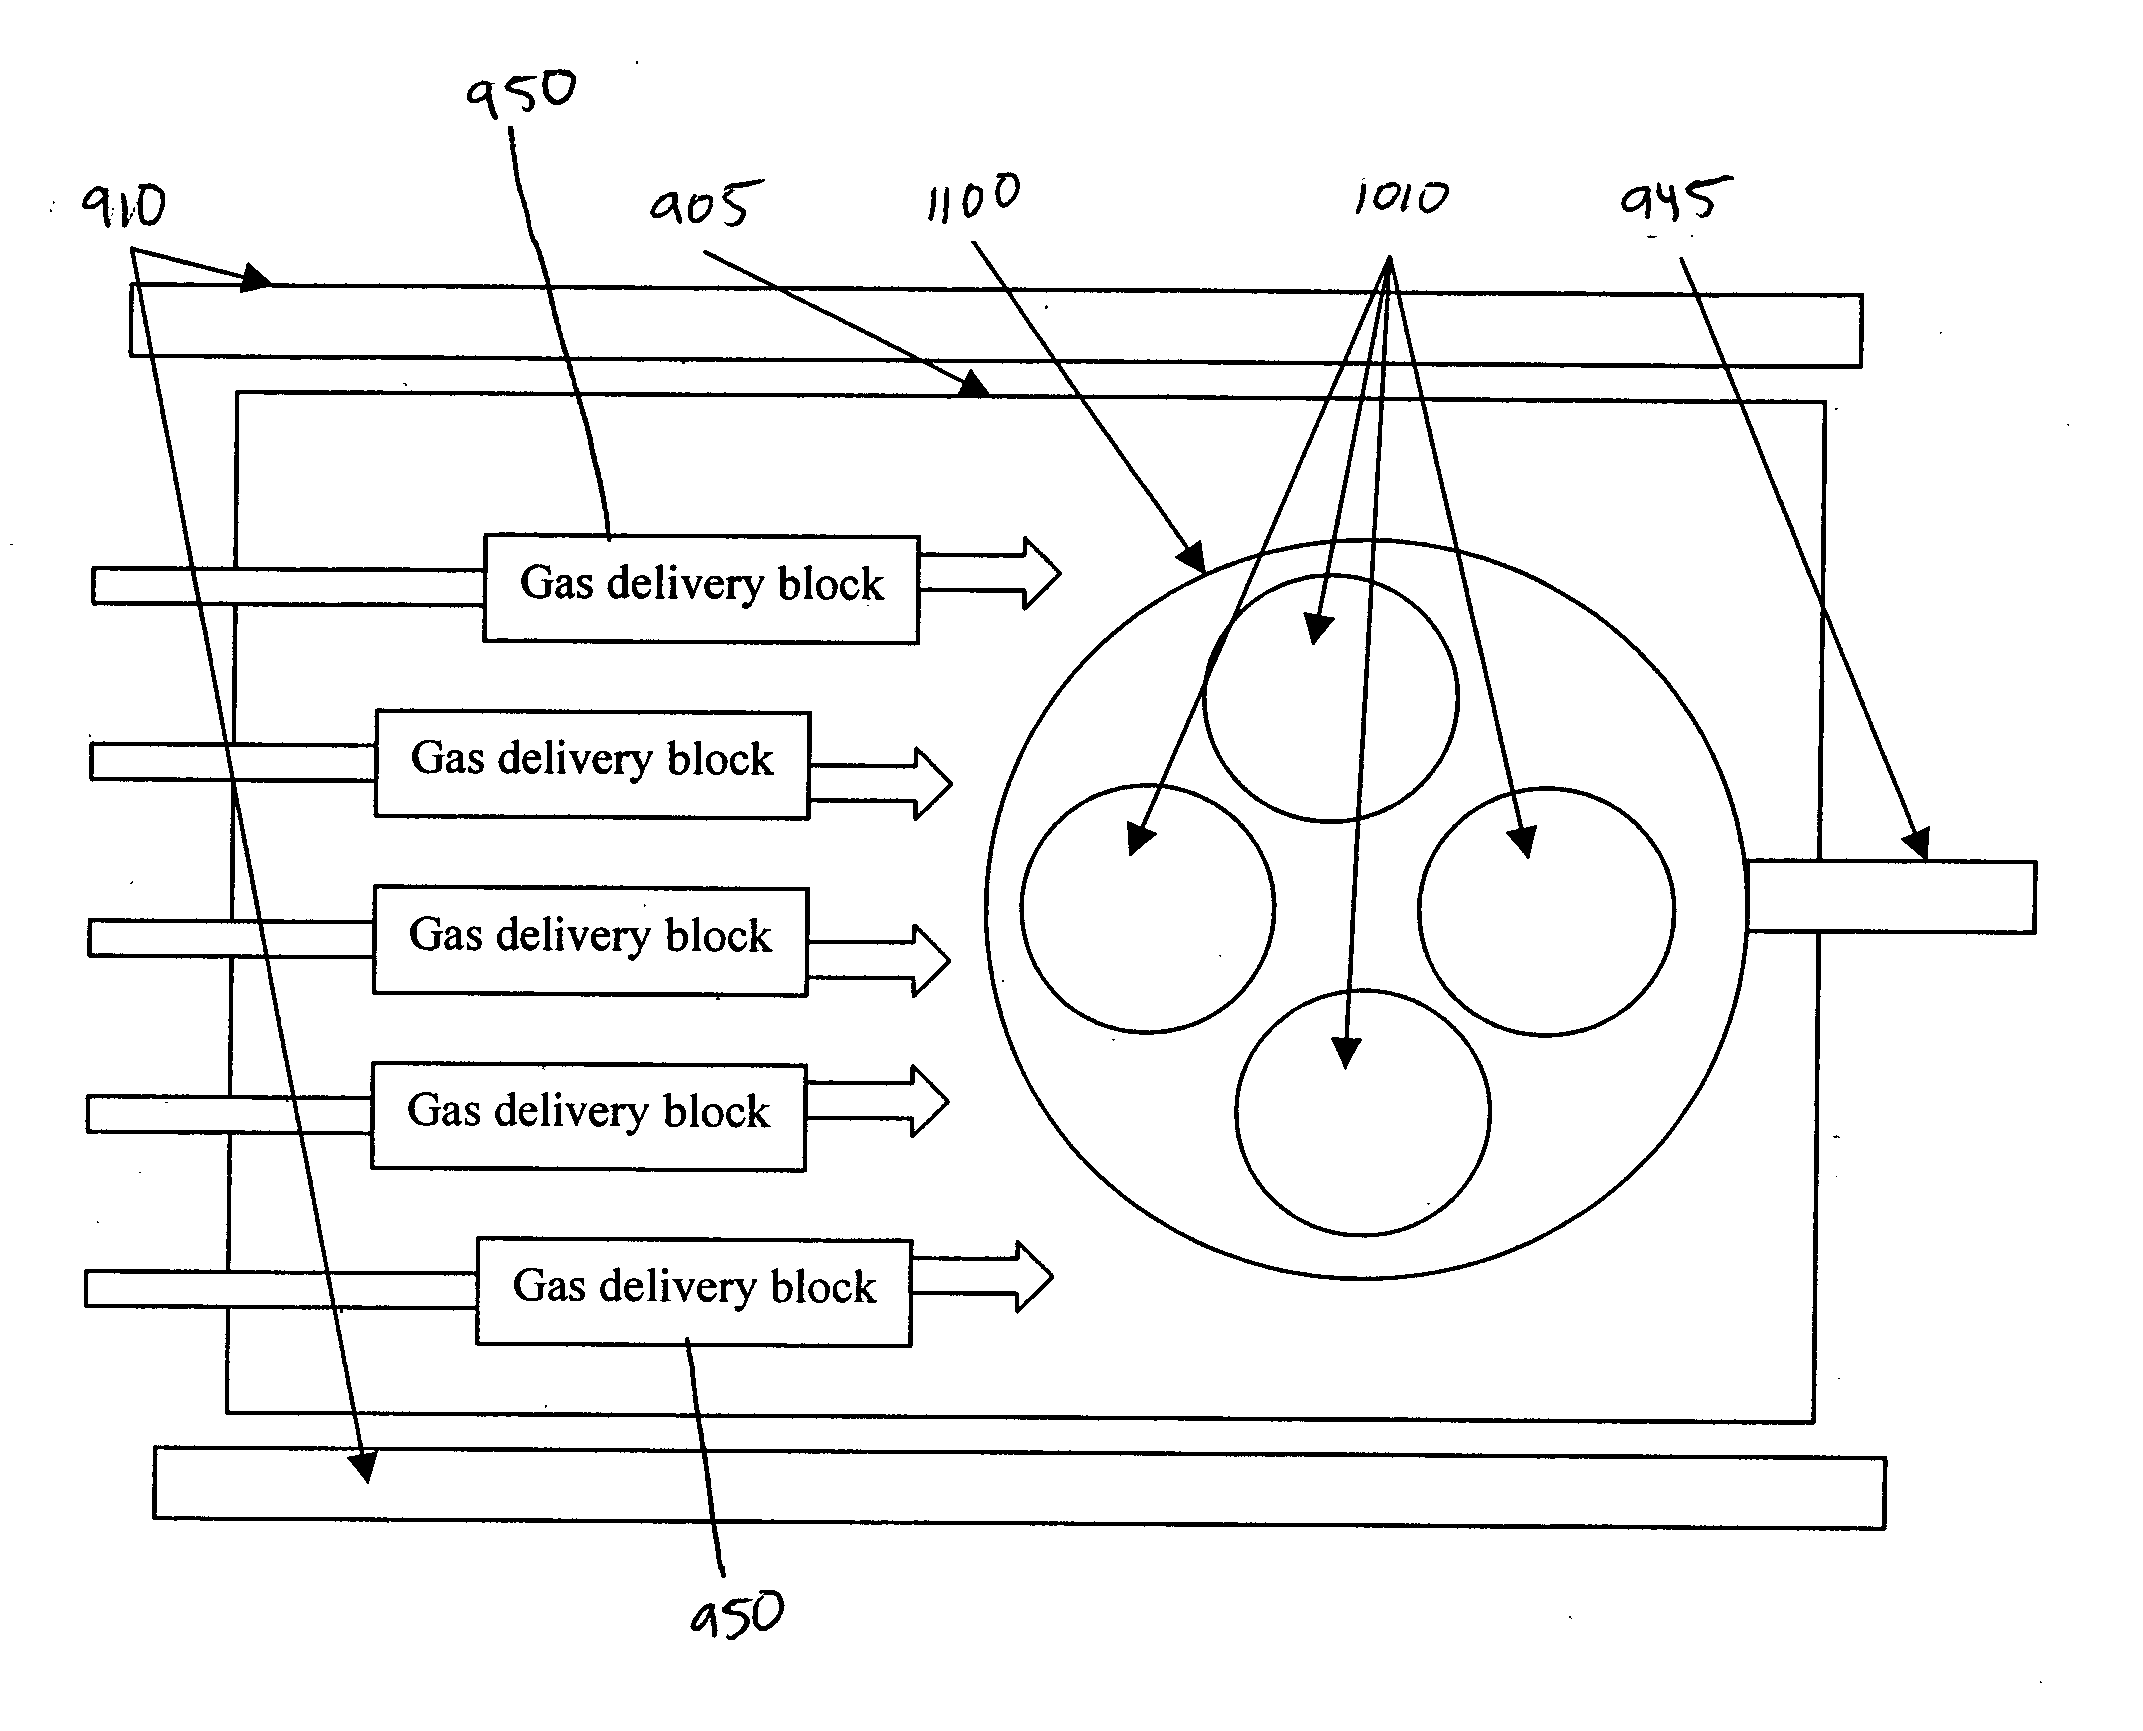 HVPE apparatus for simultaneously producing multiple wafers during a single epitaxial growth run